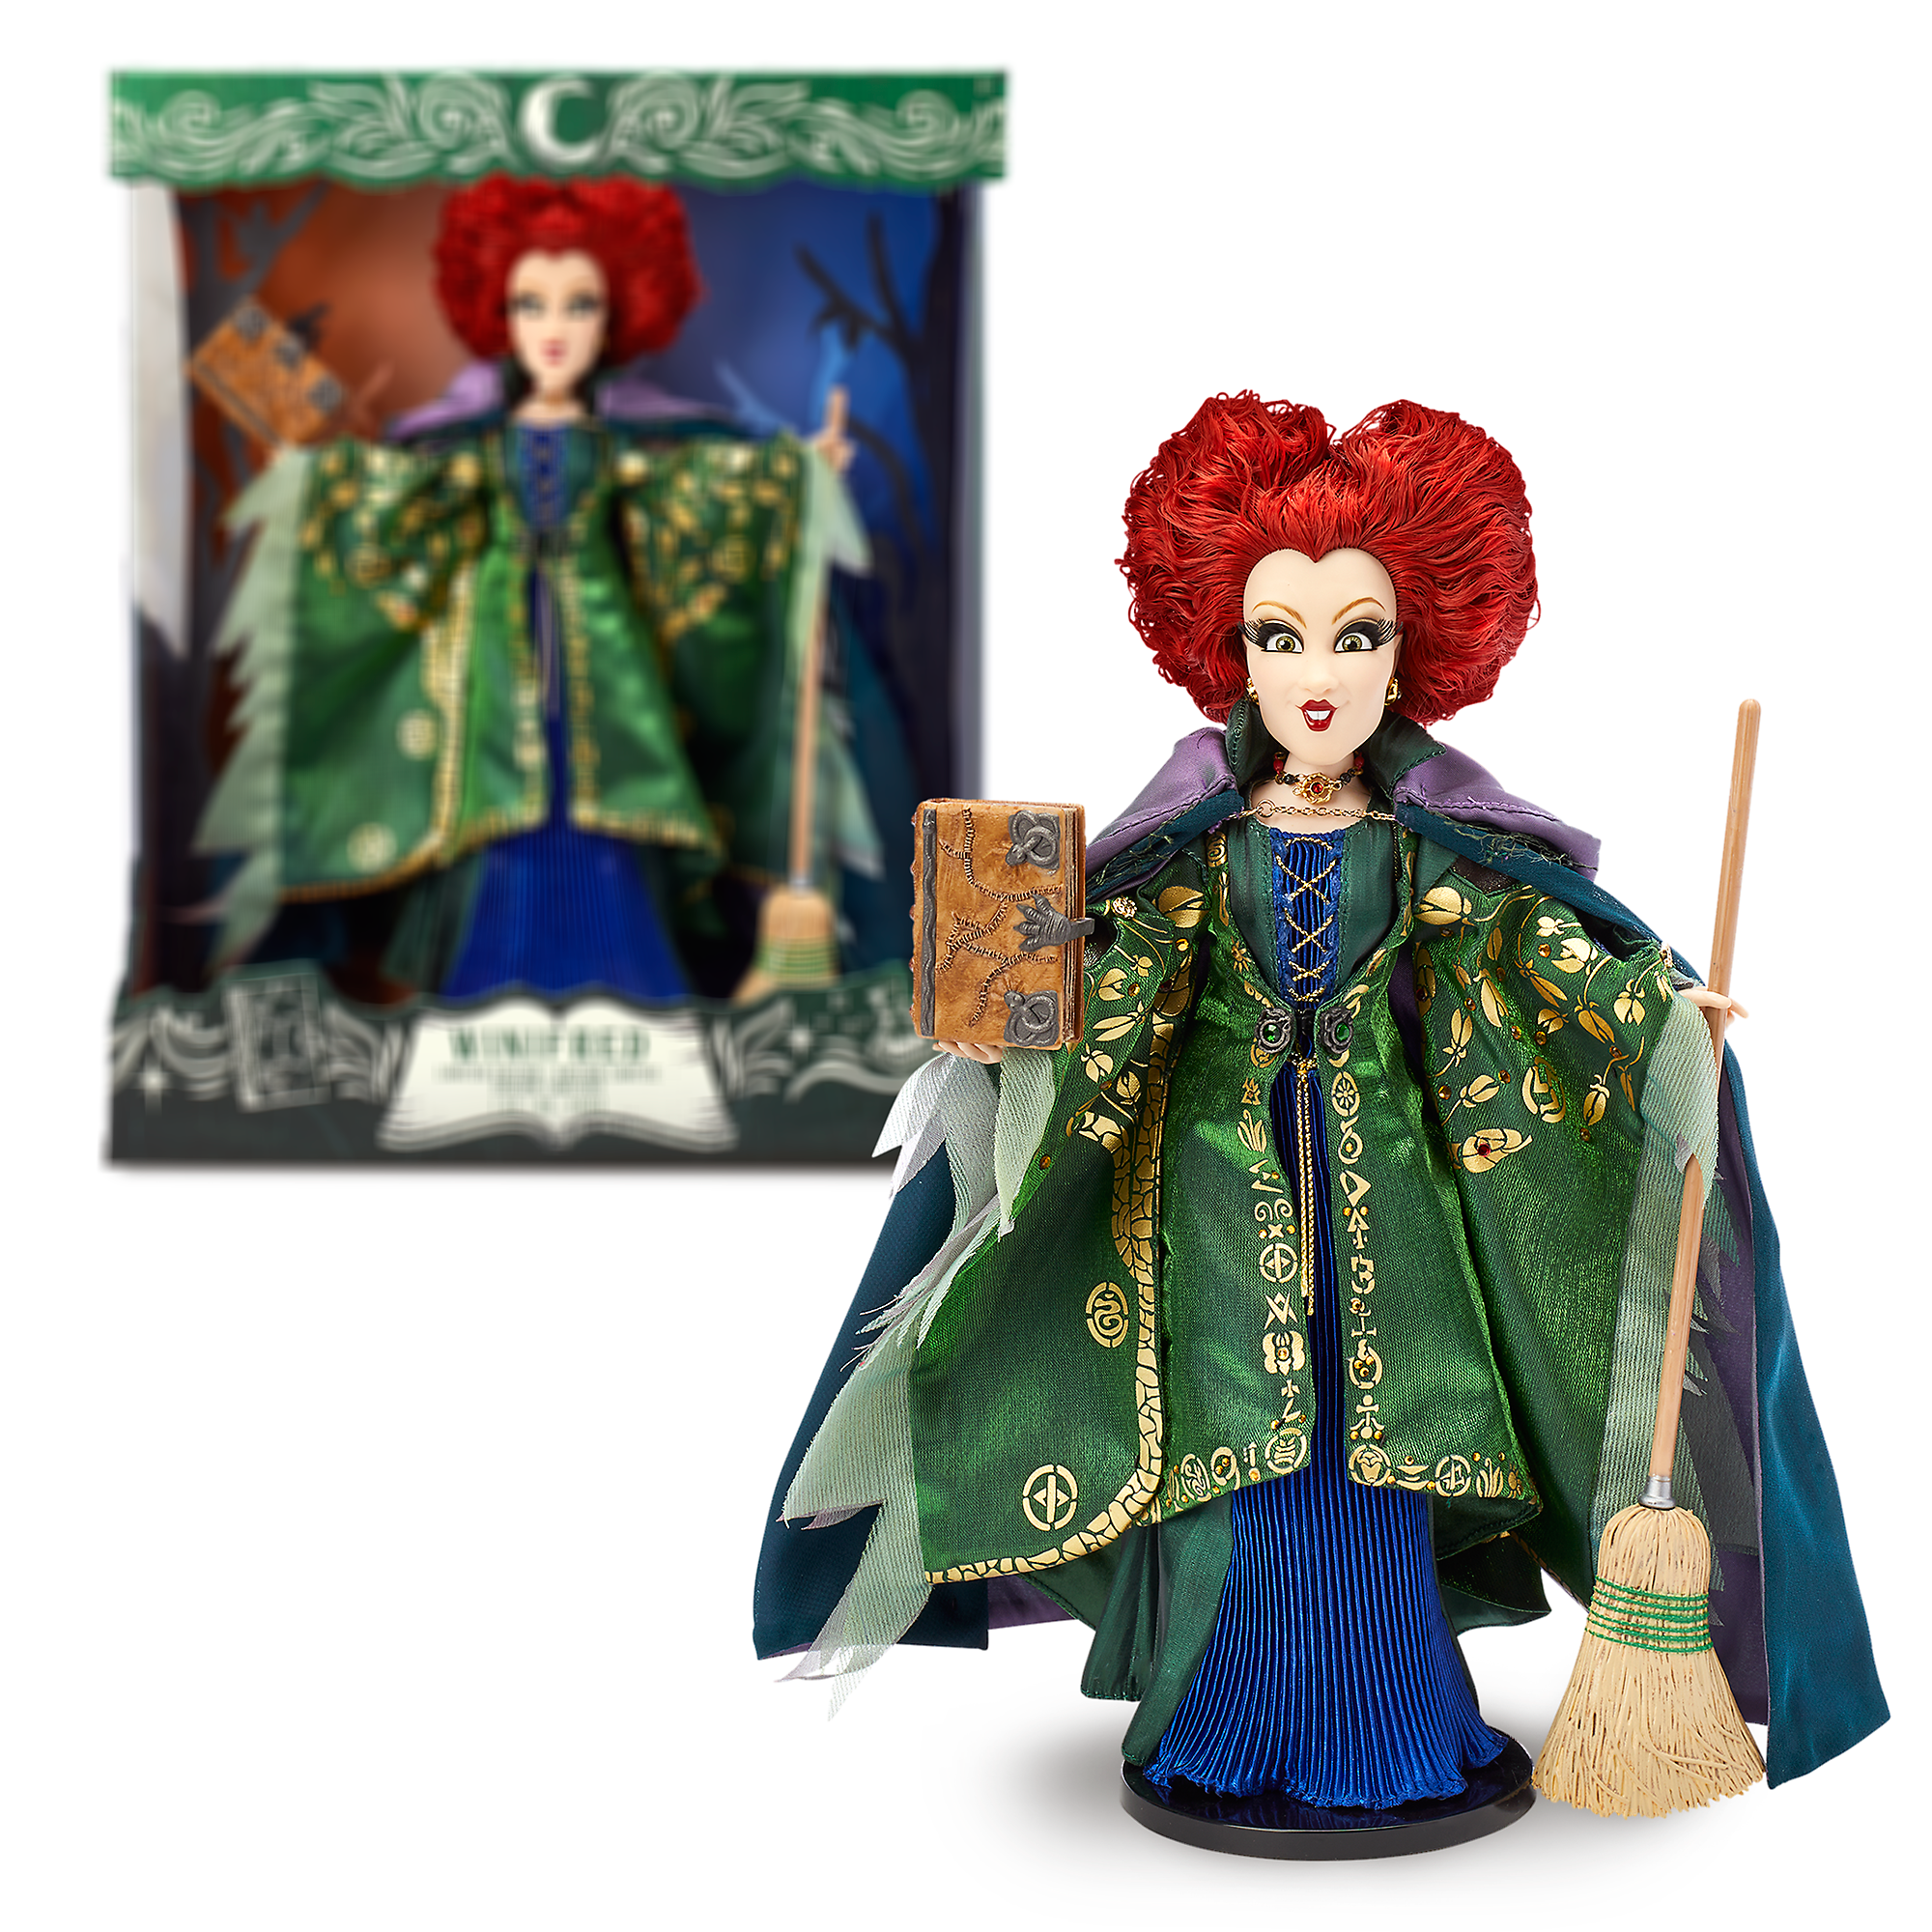 https://static.wikia.nocookie.net/disneydolls/images/0/0a/HocusPocusWinnifred1.png/revision/latest?cb=20211113230939